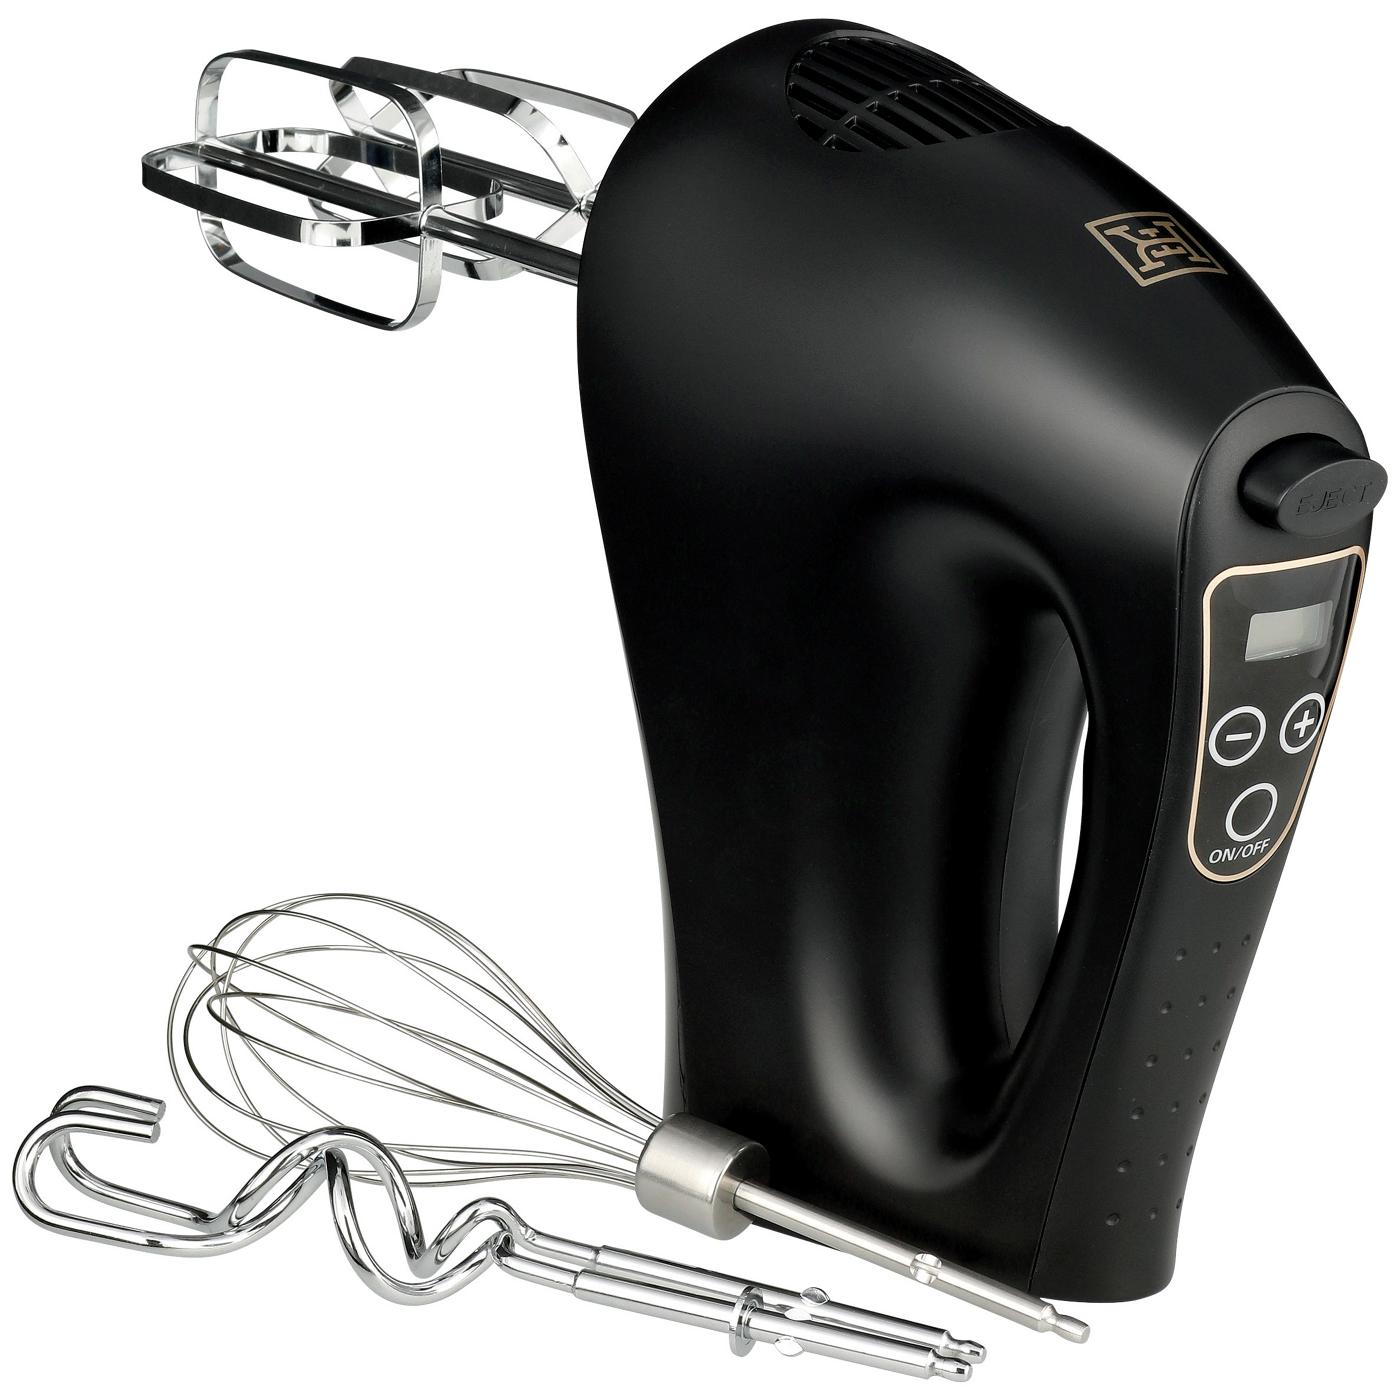 Kitchen & Table by H-E-B 10-Speed Digital Hand Mixer – Classic